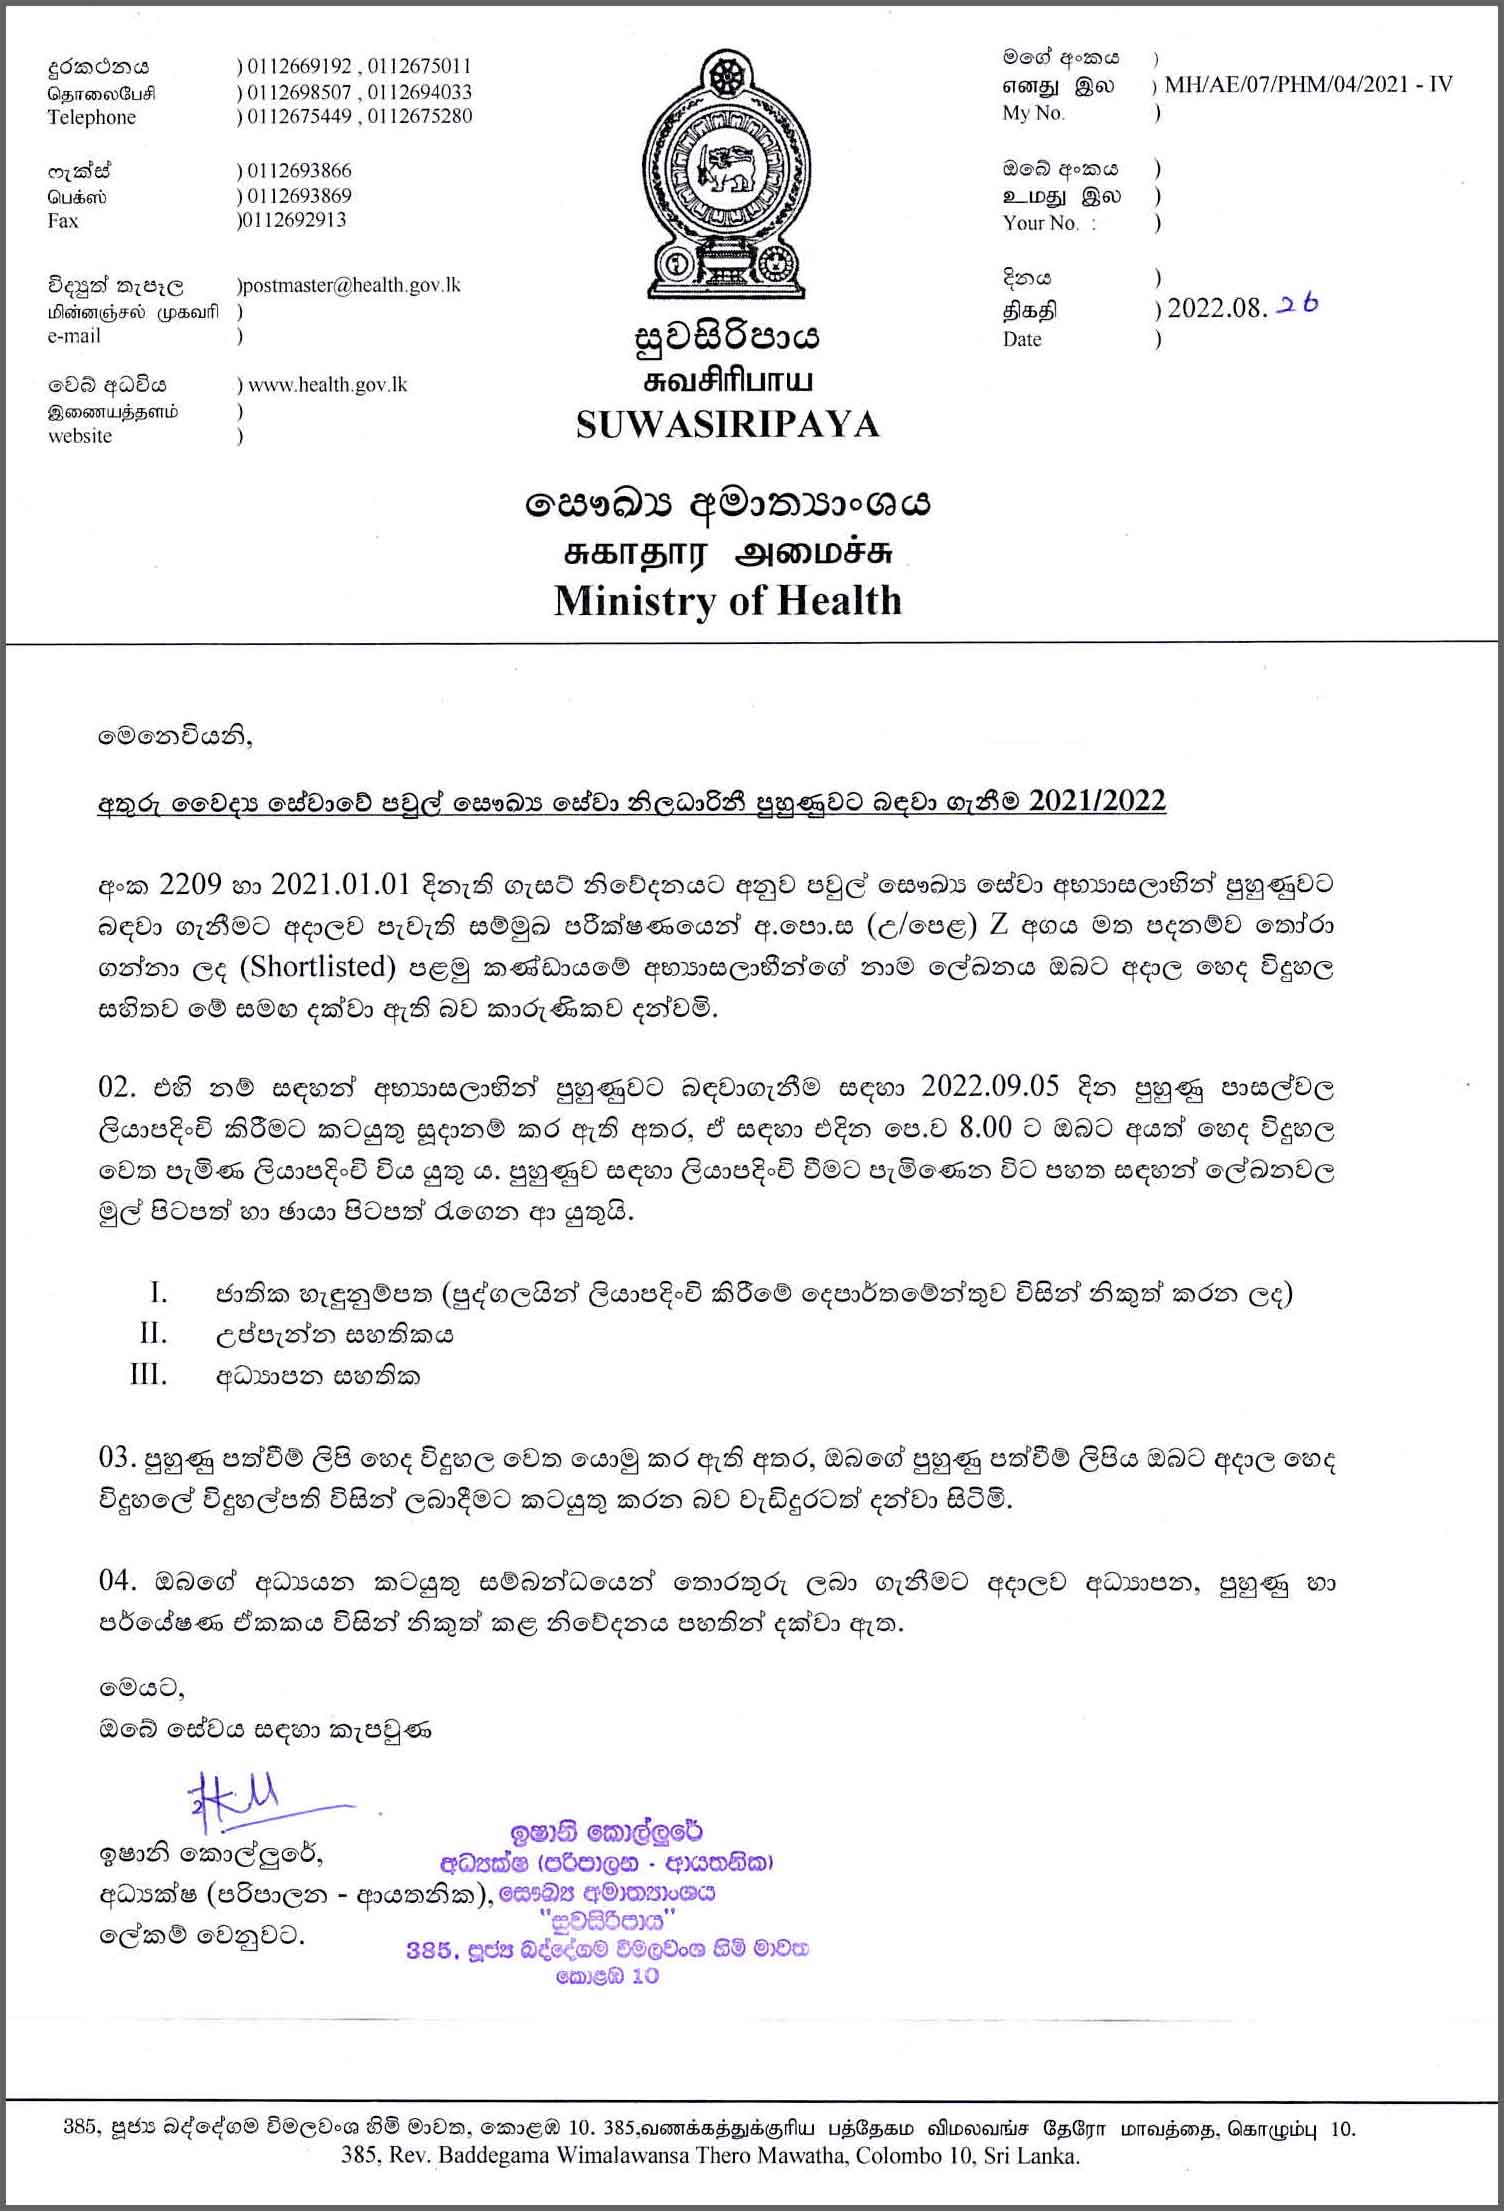 Notice from Ministry of Health on Selected List for Public Health Midwife Training Course 2021 (2022) - 